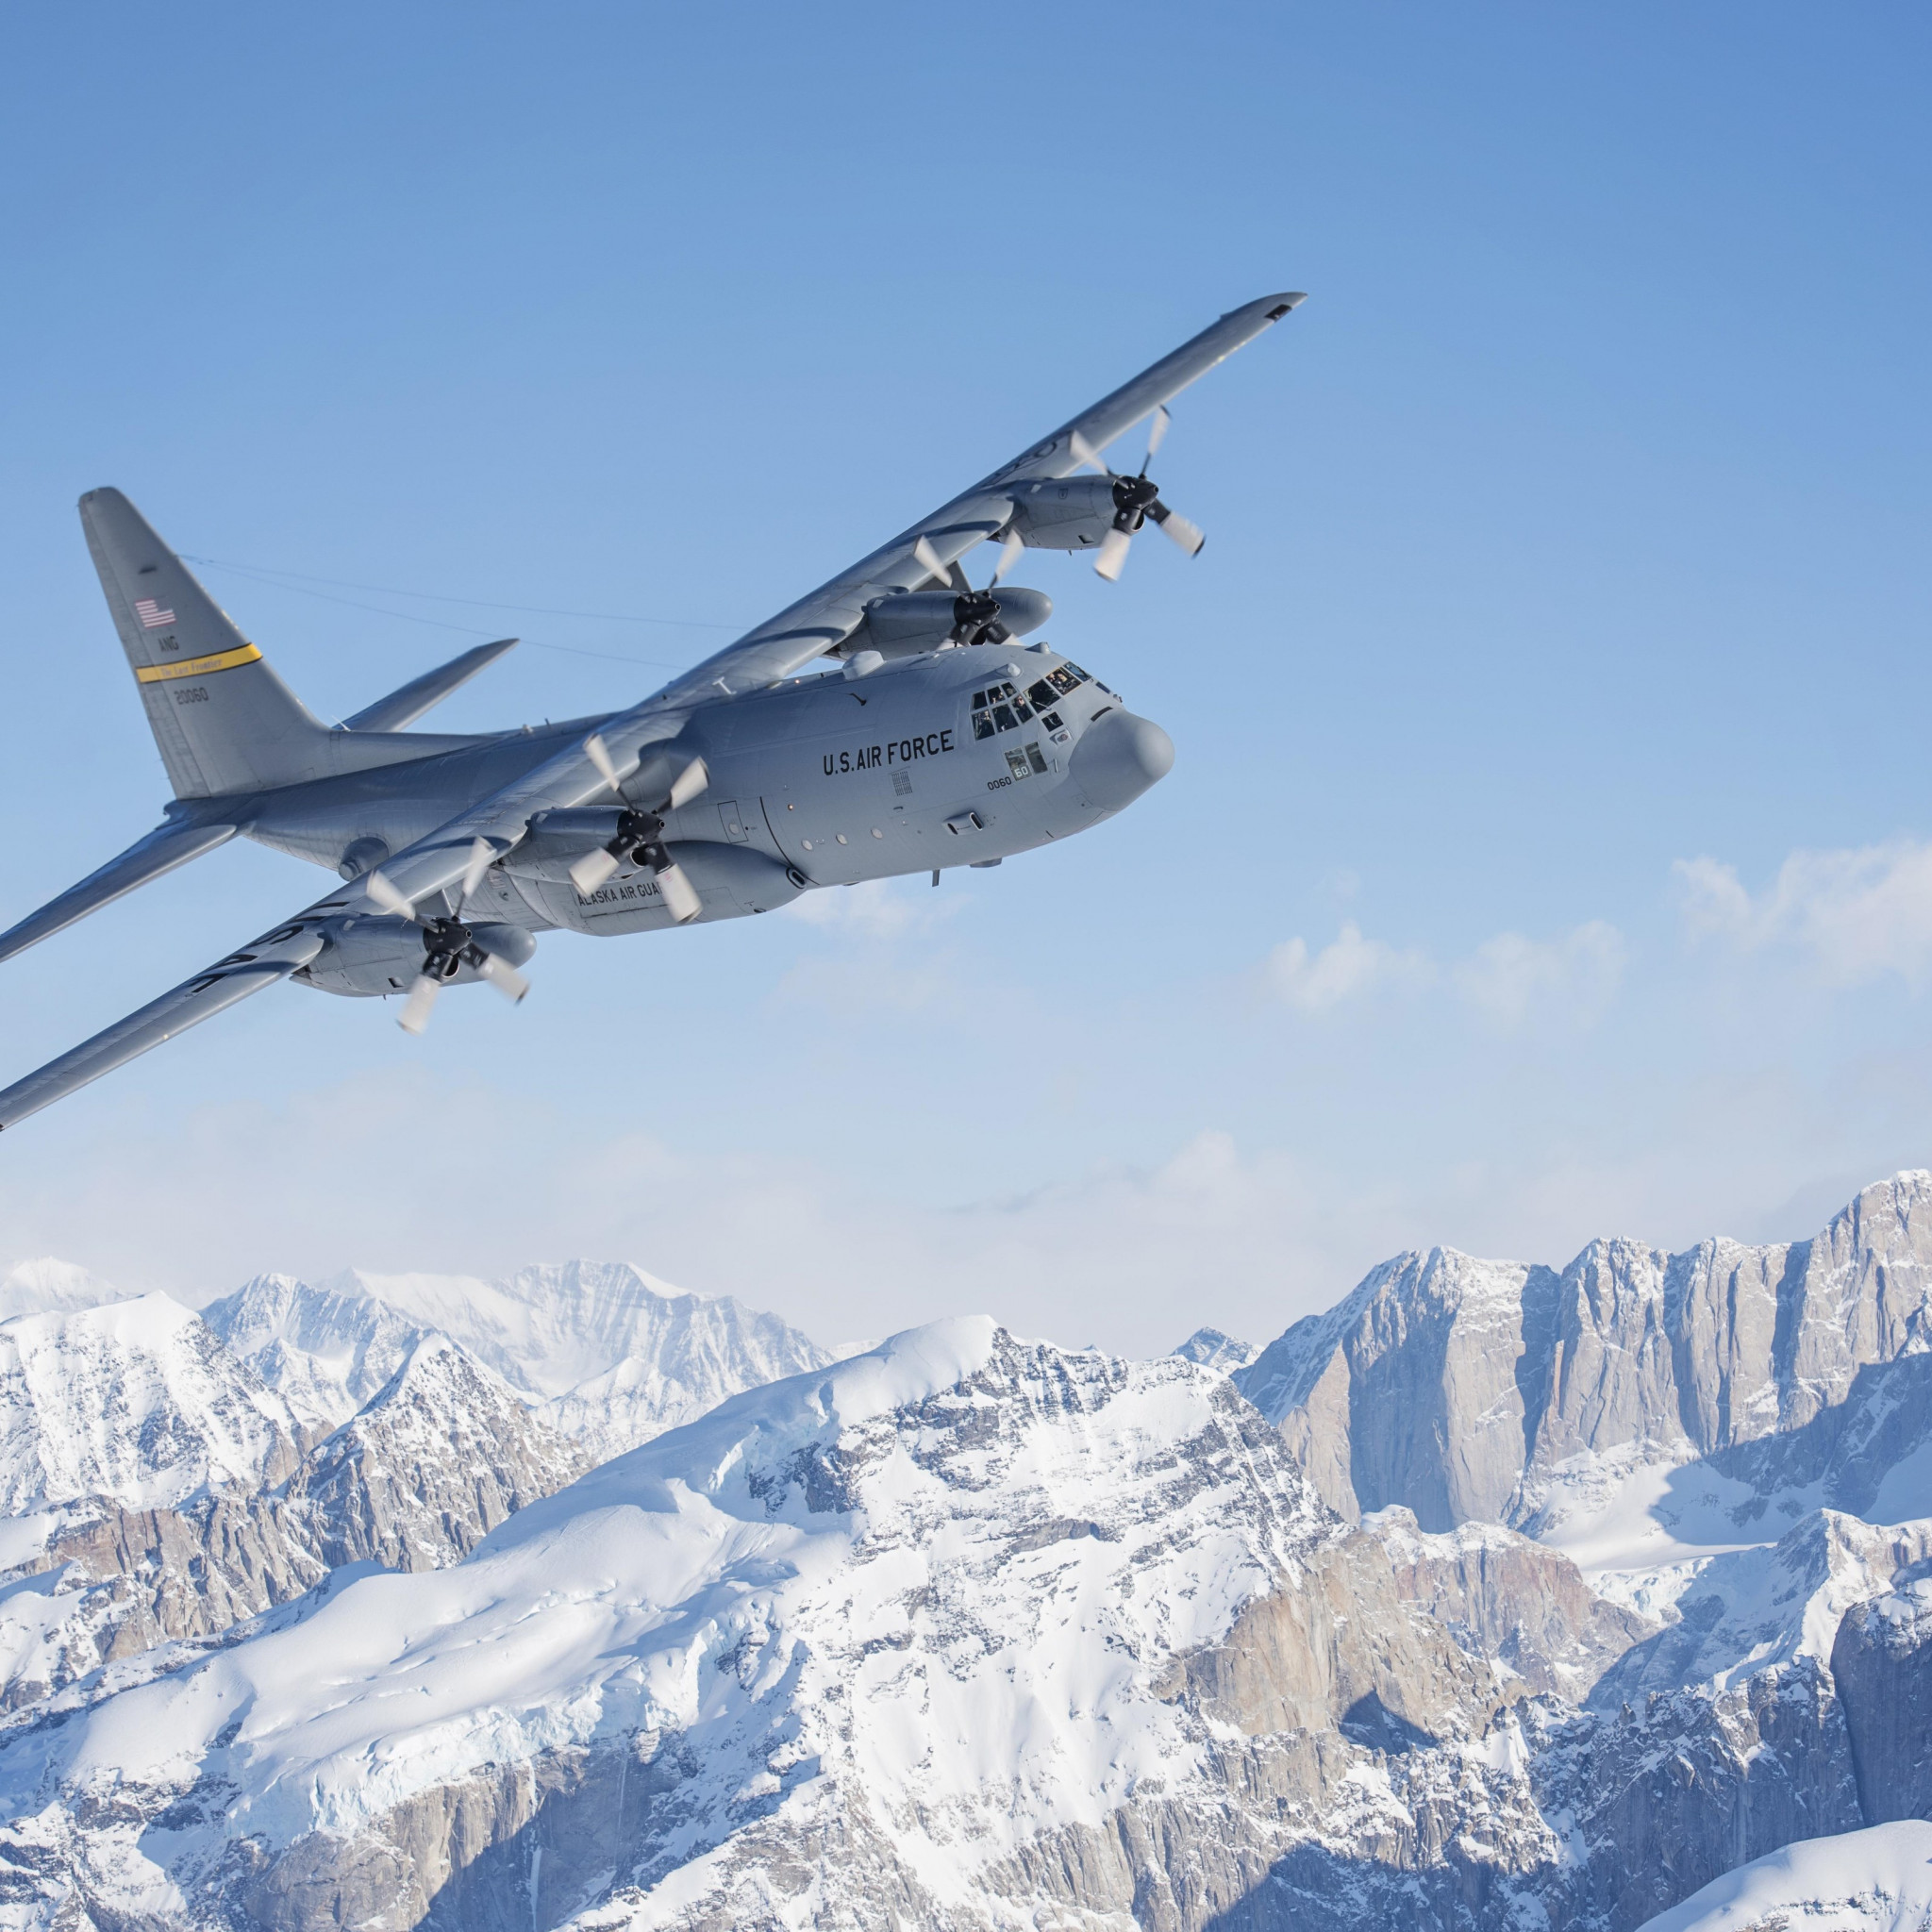 Hercules Aircraft Wallpaper - Airplane With Ice Mountains - HD Wallpaper 